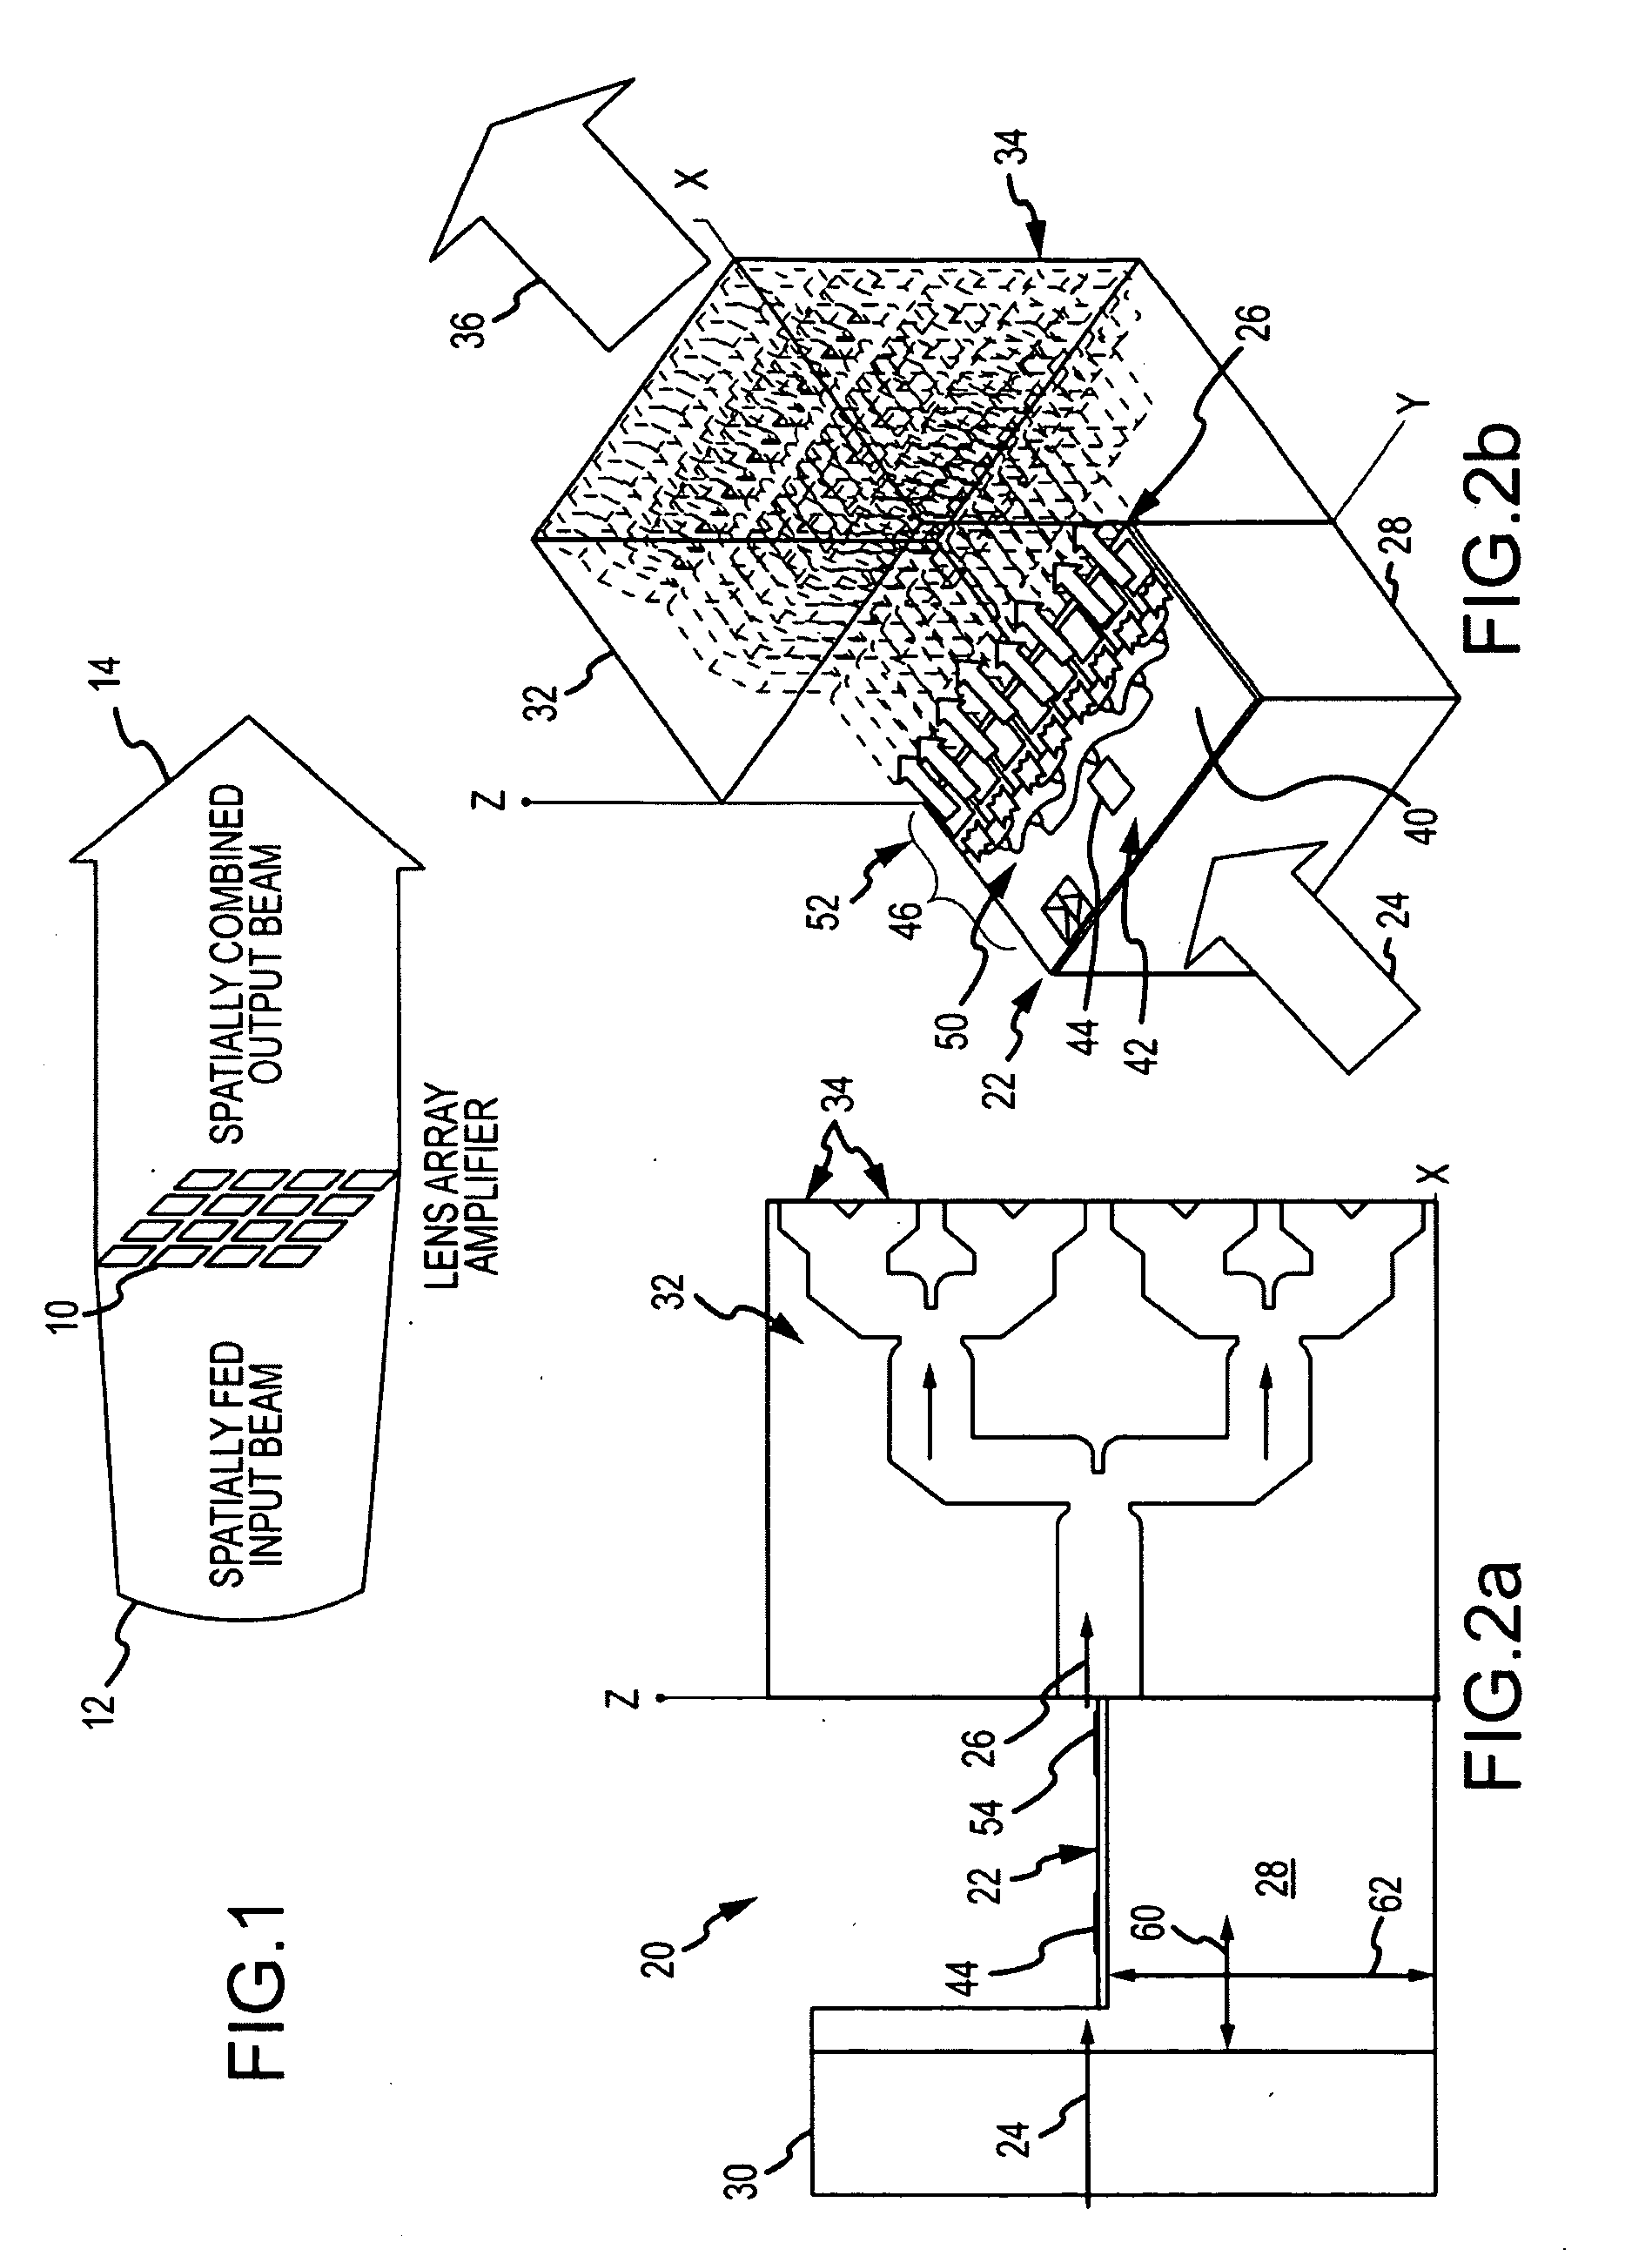 Modular solid-state millimeter wave (MMW) RF power source